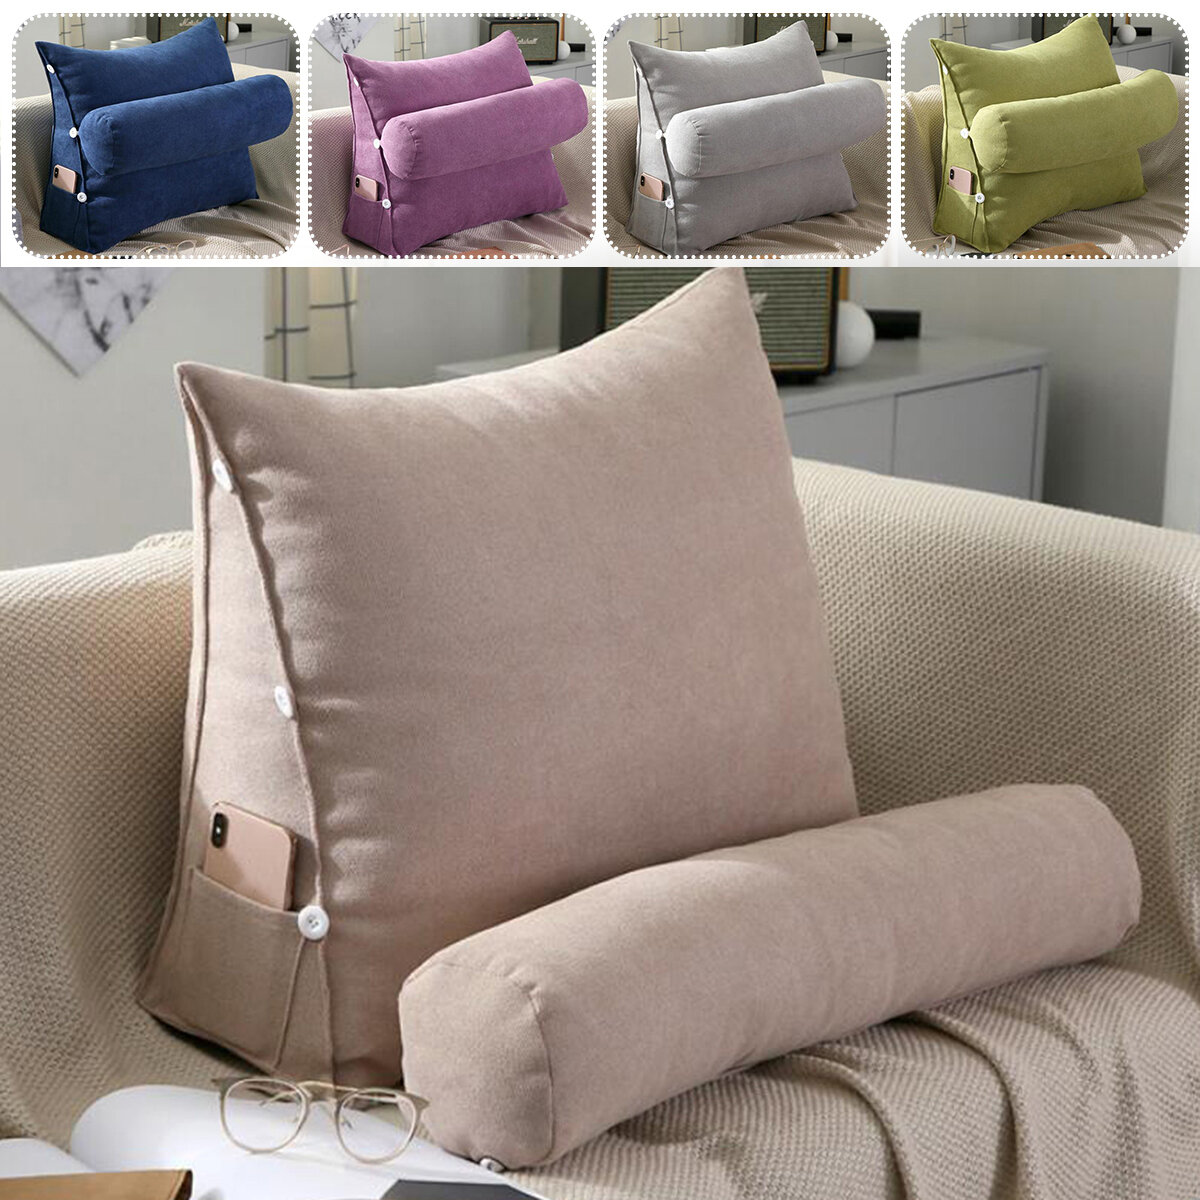 

Adjustable Zipper Back Wedge Micro Plush Bed Rest Cushion Pillow for Sofa Bed Office Chair Rest Waist Neck Support